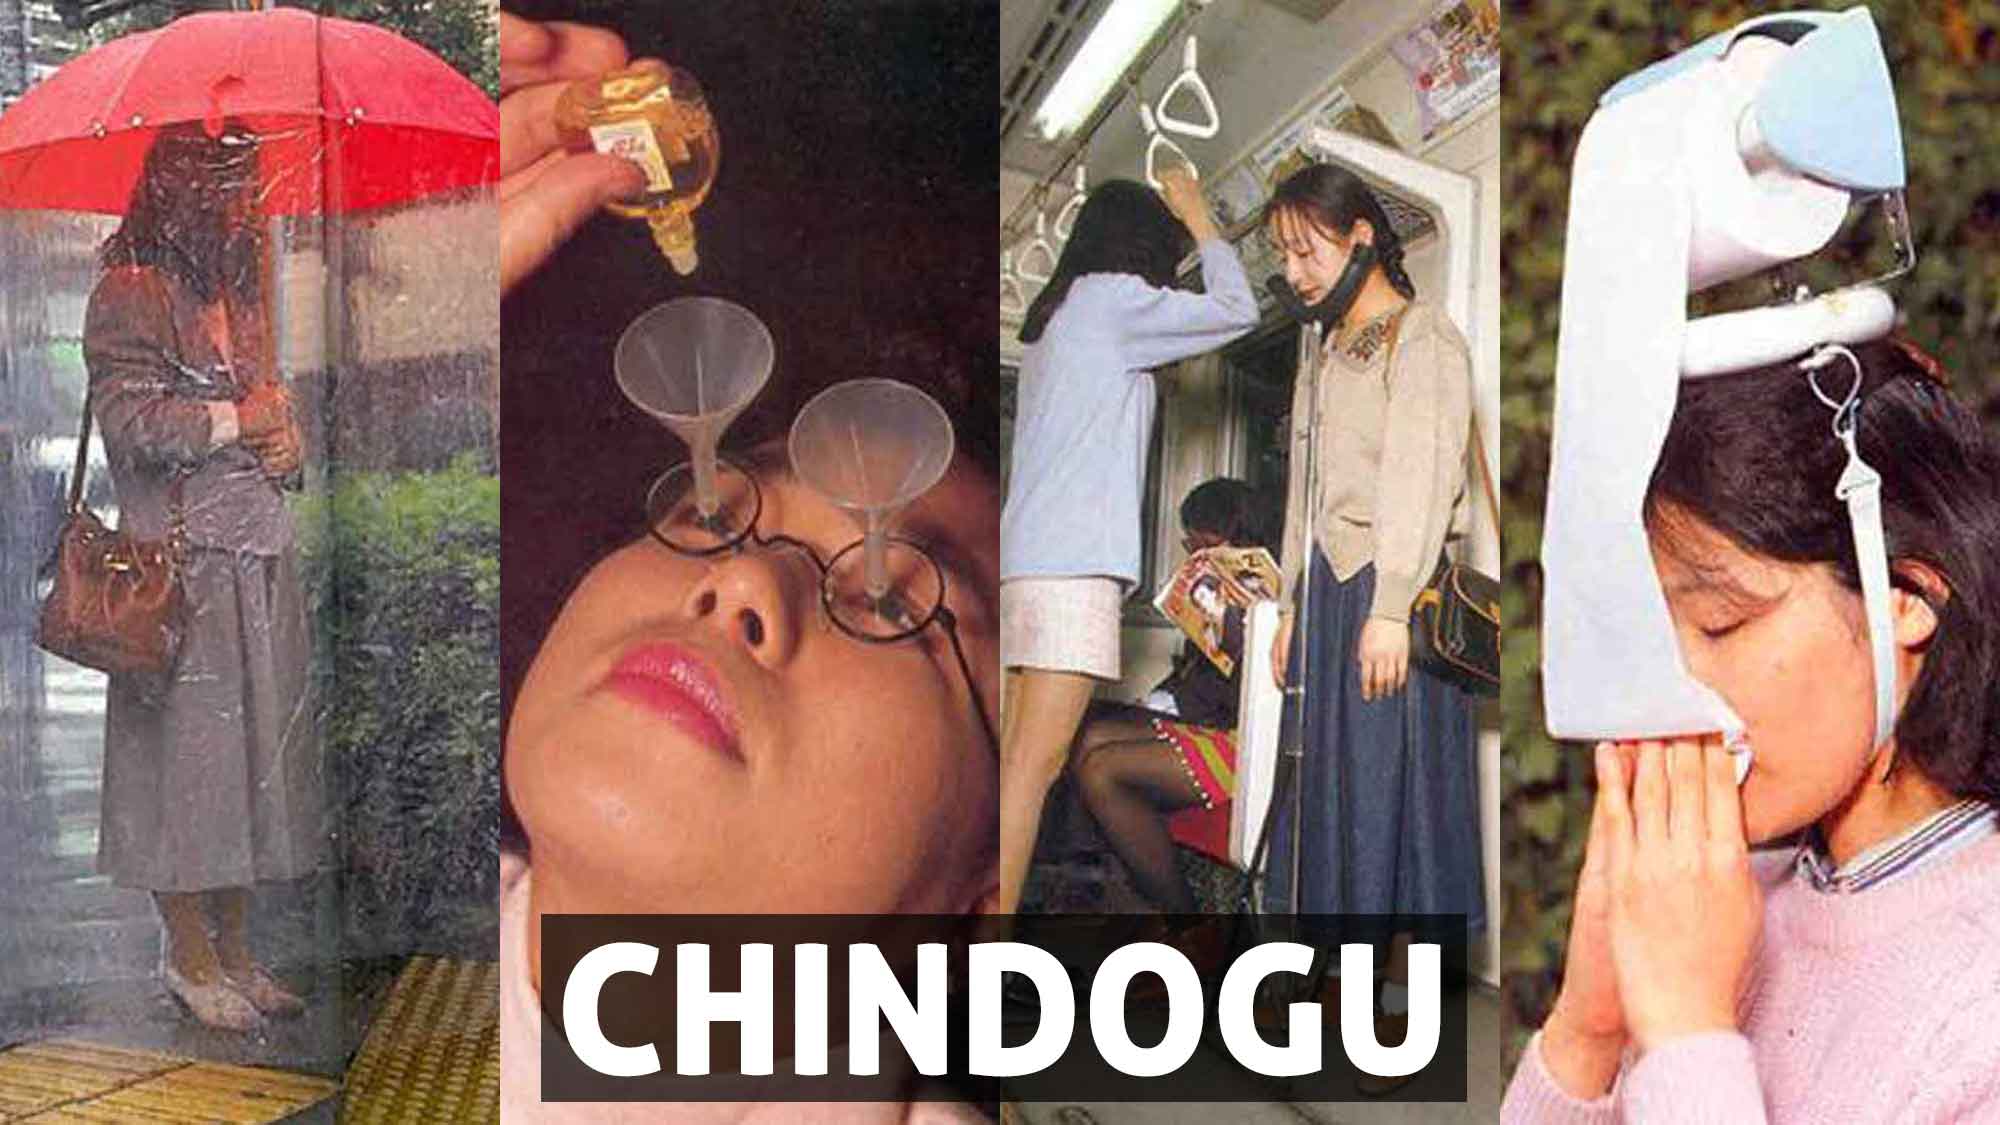 8 Silly Chindogu Inventions That Will Make You Laugh